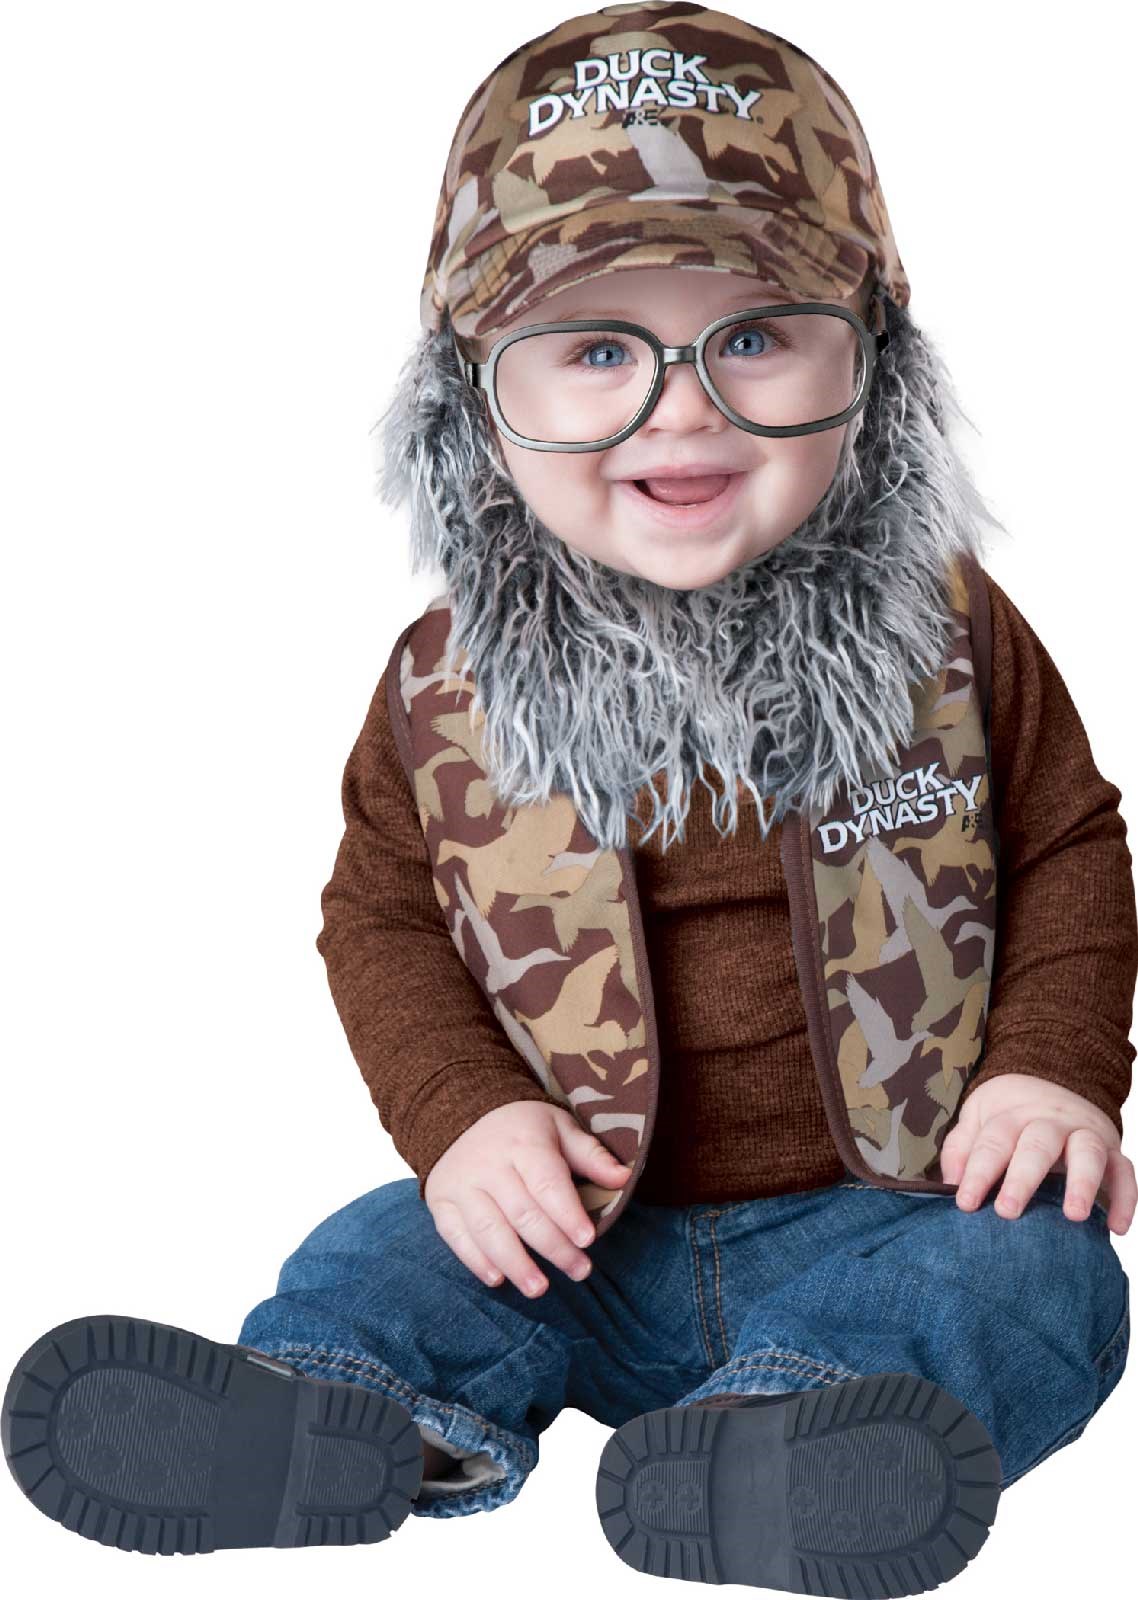 Duck Dynasty - Uncle Si Infant/Toddler Costume